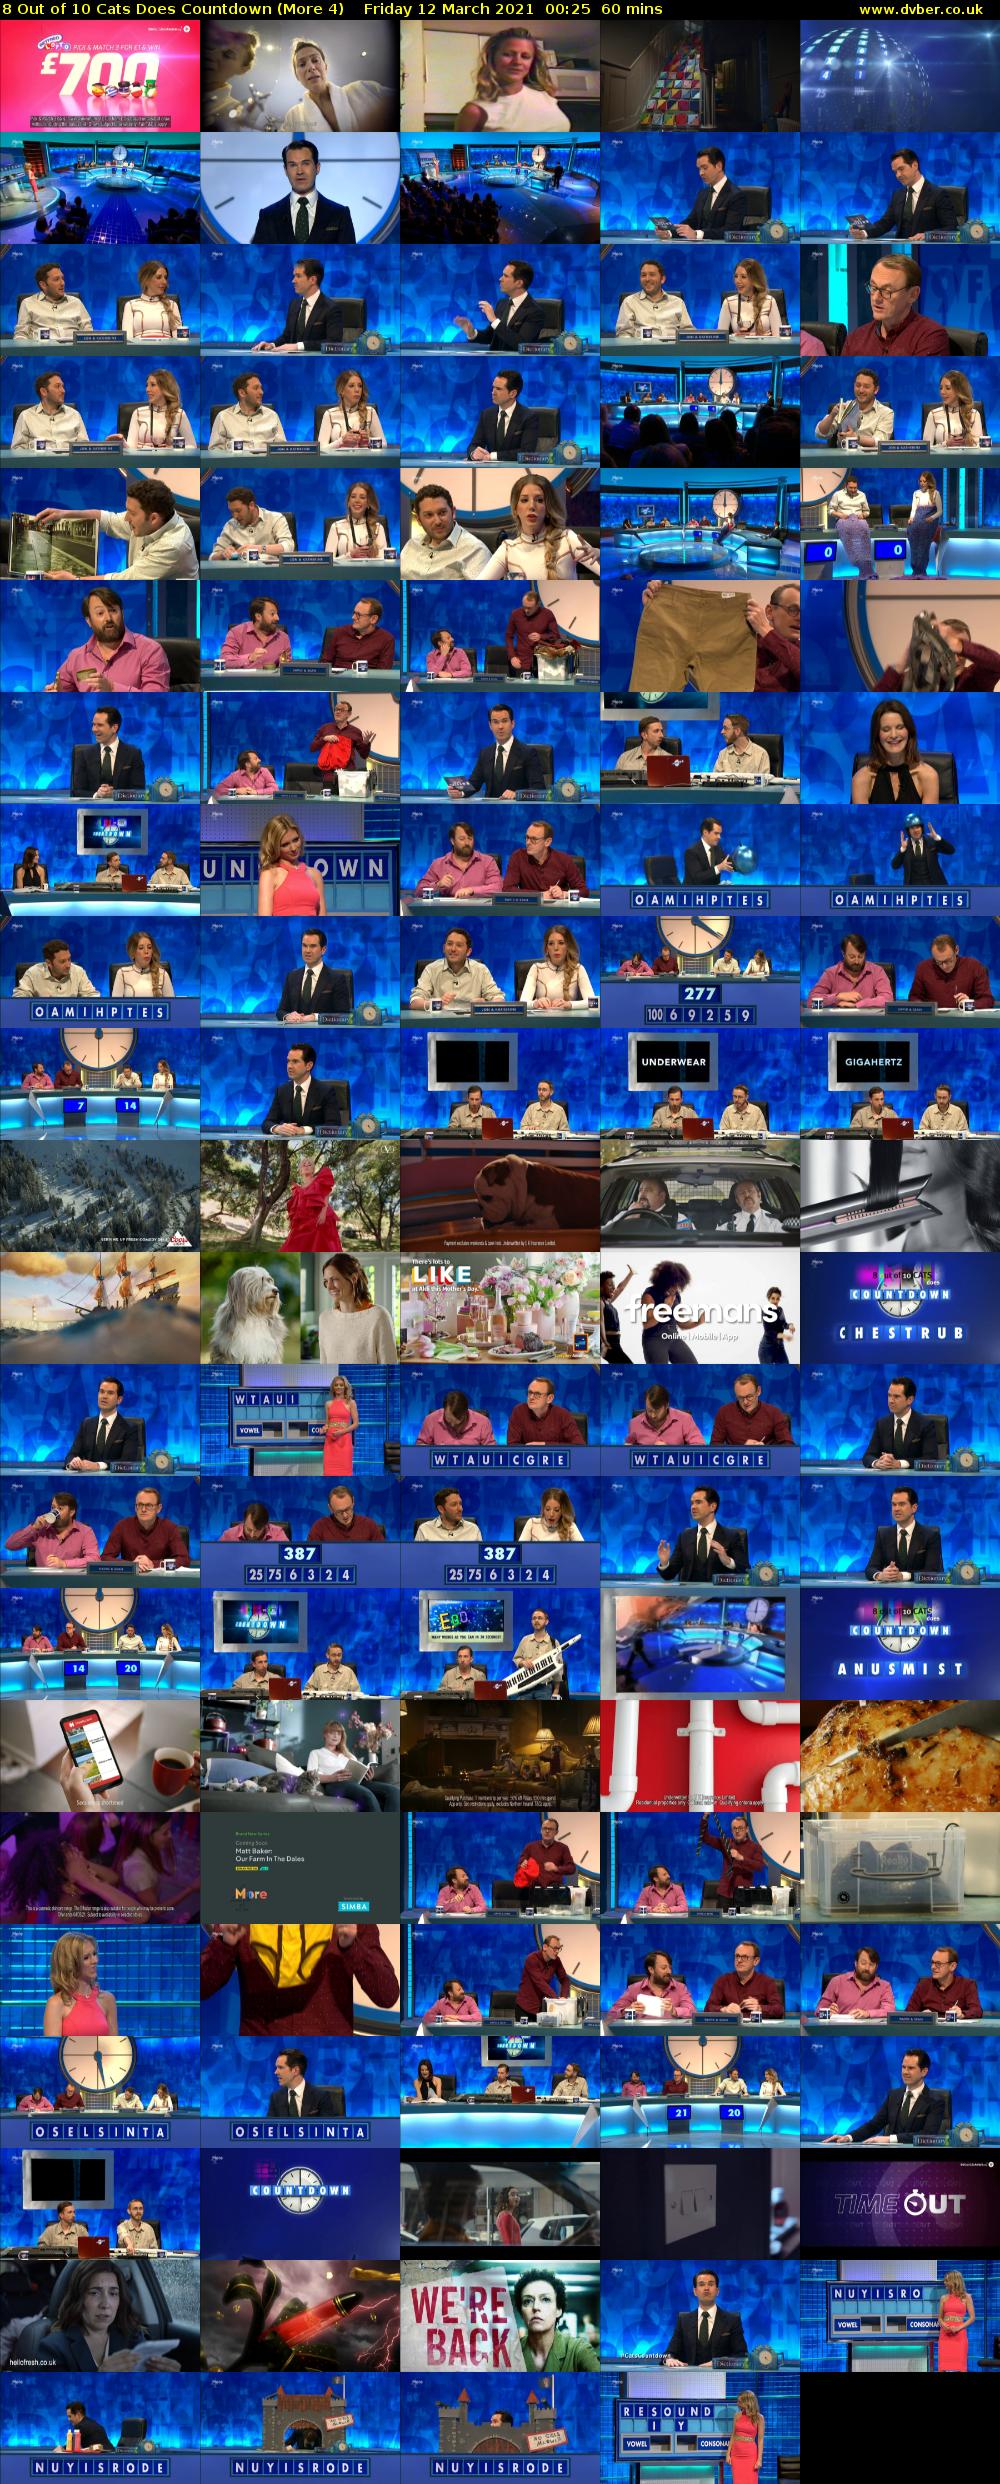 8 Out of 10 Cats Does Countdown (More 4) Friday 12 March 2021 00:25 - 01:25